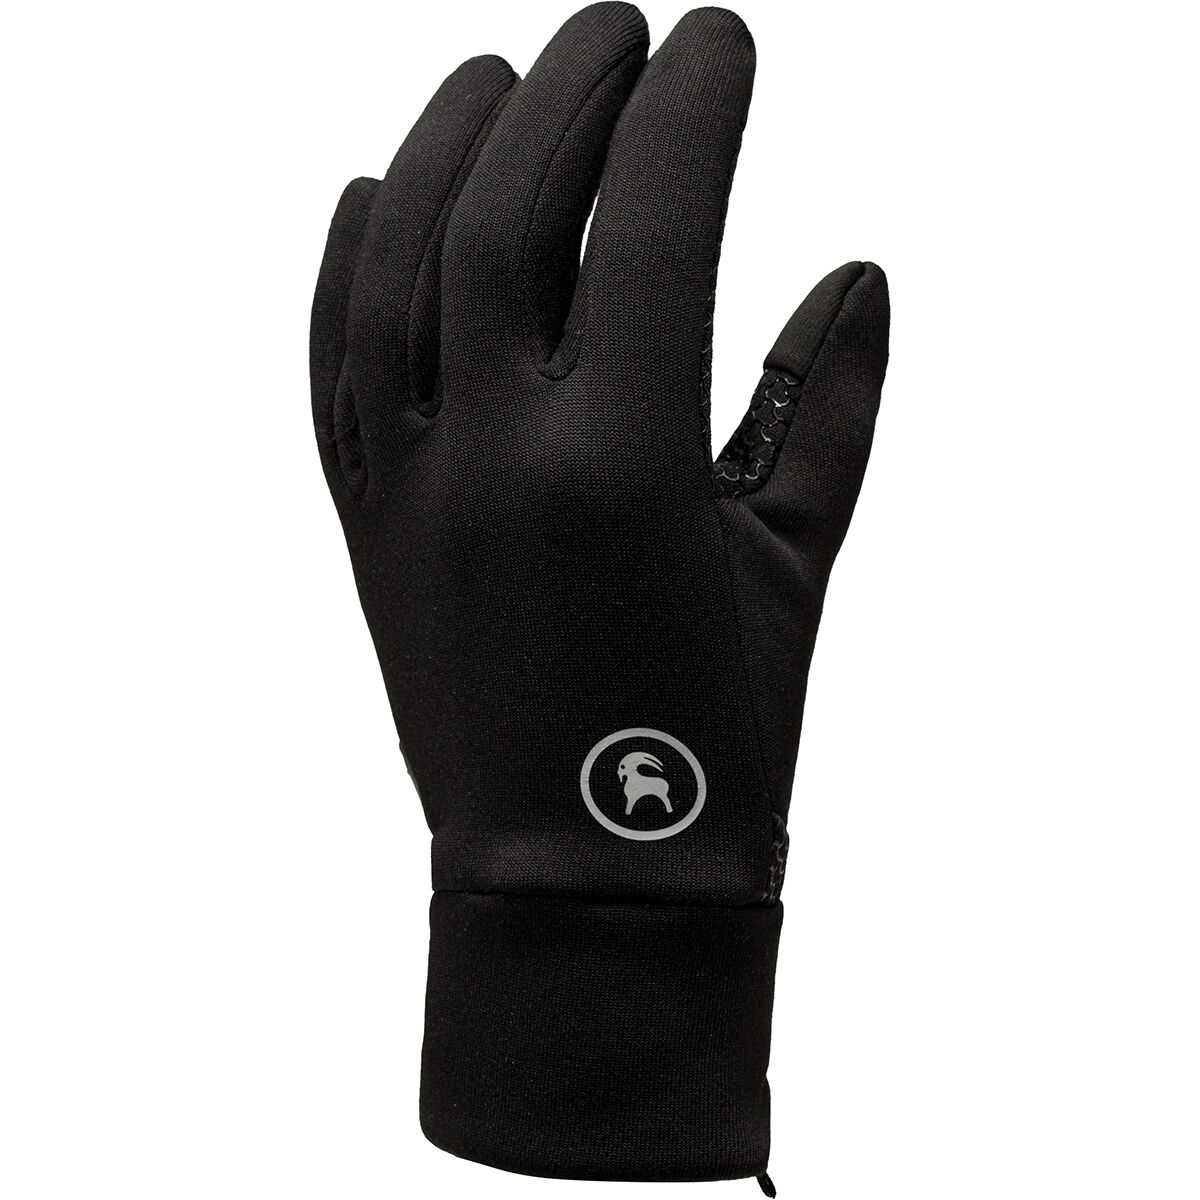 Backcountry Stretch Liner Glove